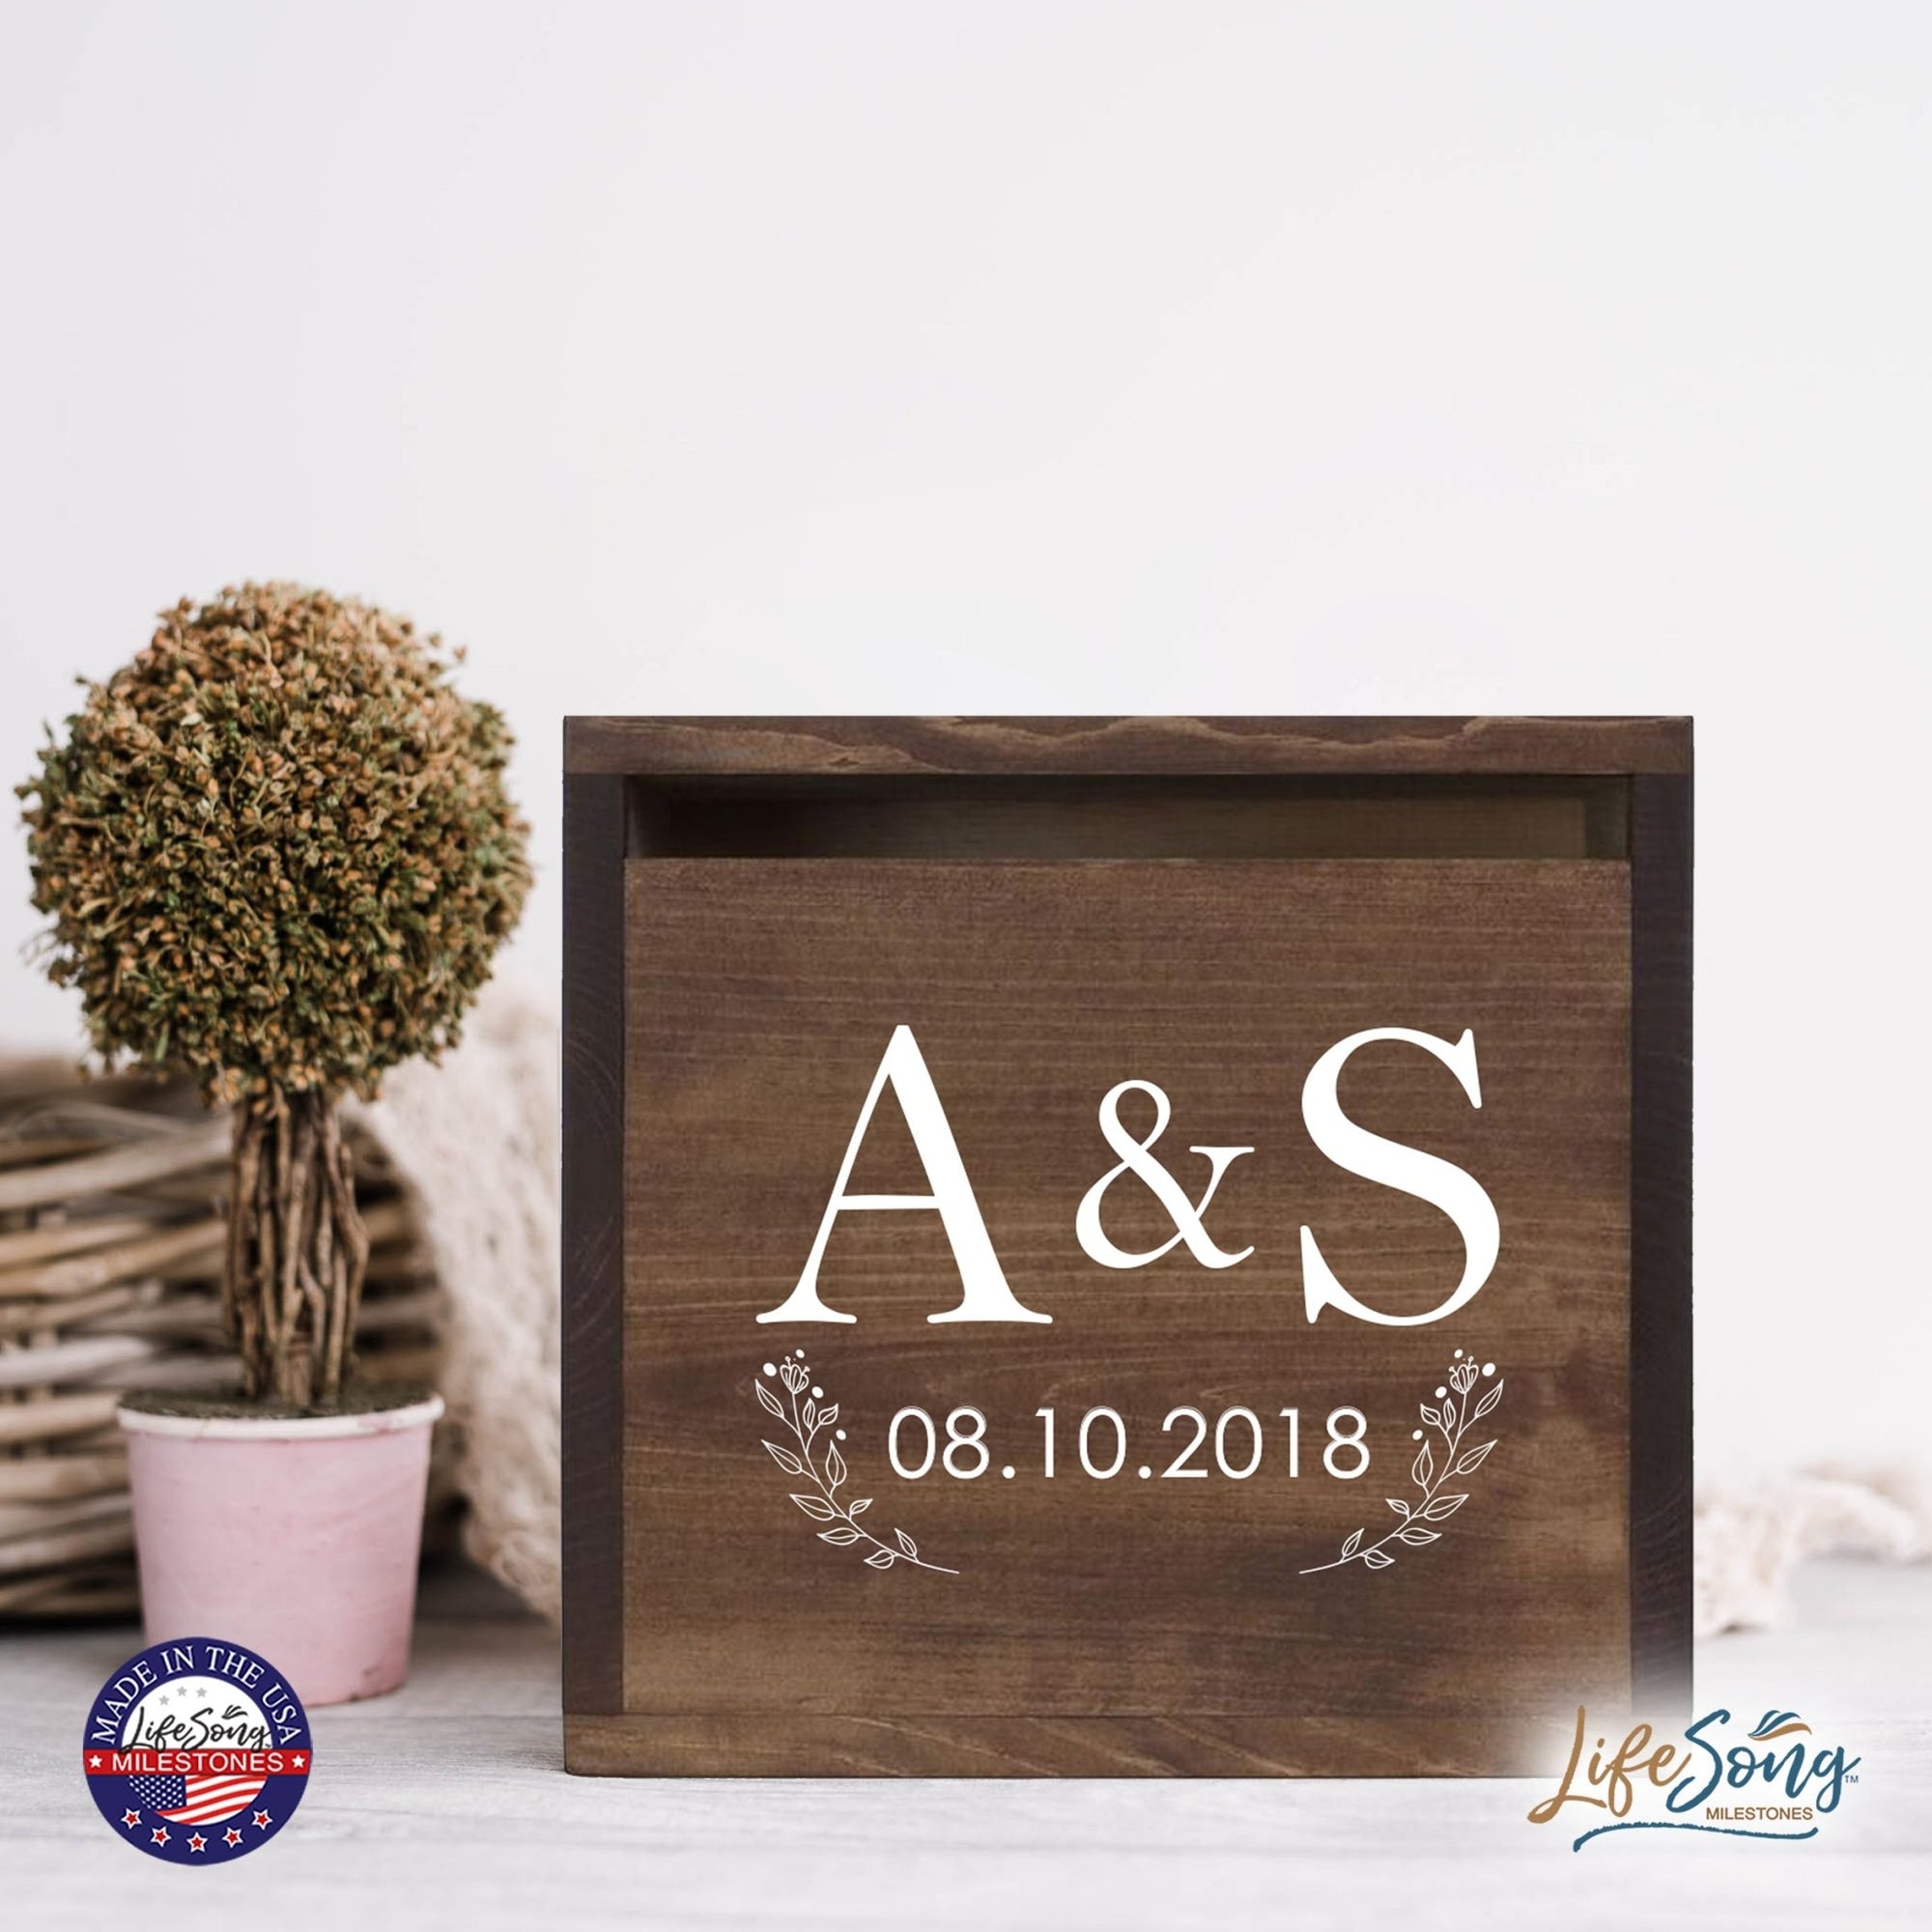 Personalized Wooden Card Box for Wedding Ceremonies, Venues, Receptions, Bridal Showers, and Engagement Parties 13.5x12 - A&S (Flowers) - LifeSong Milestones